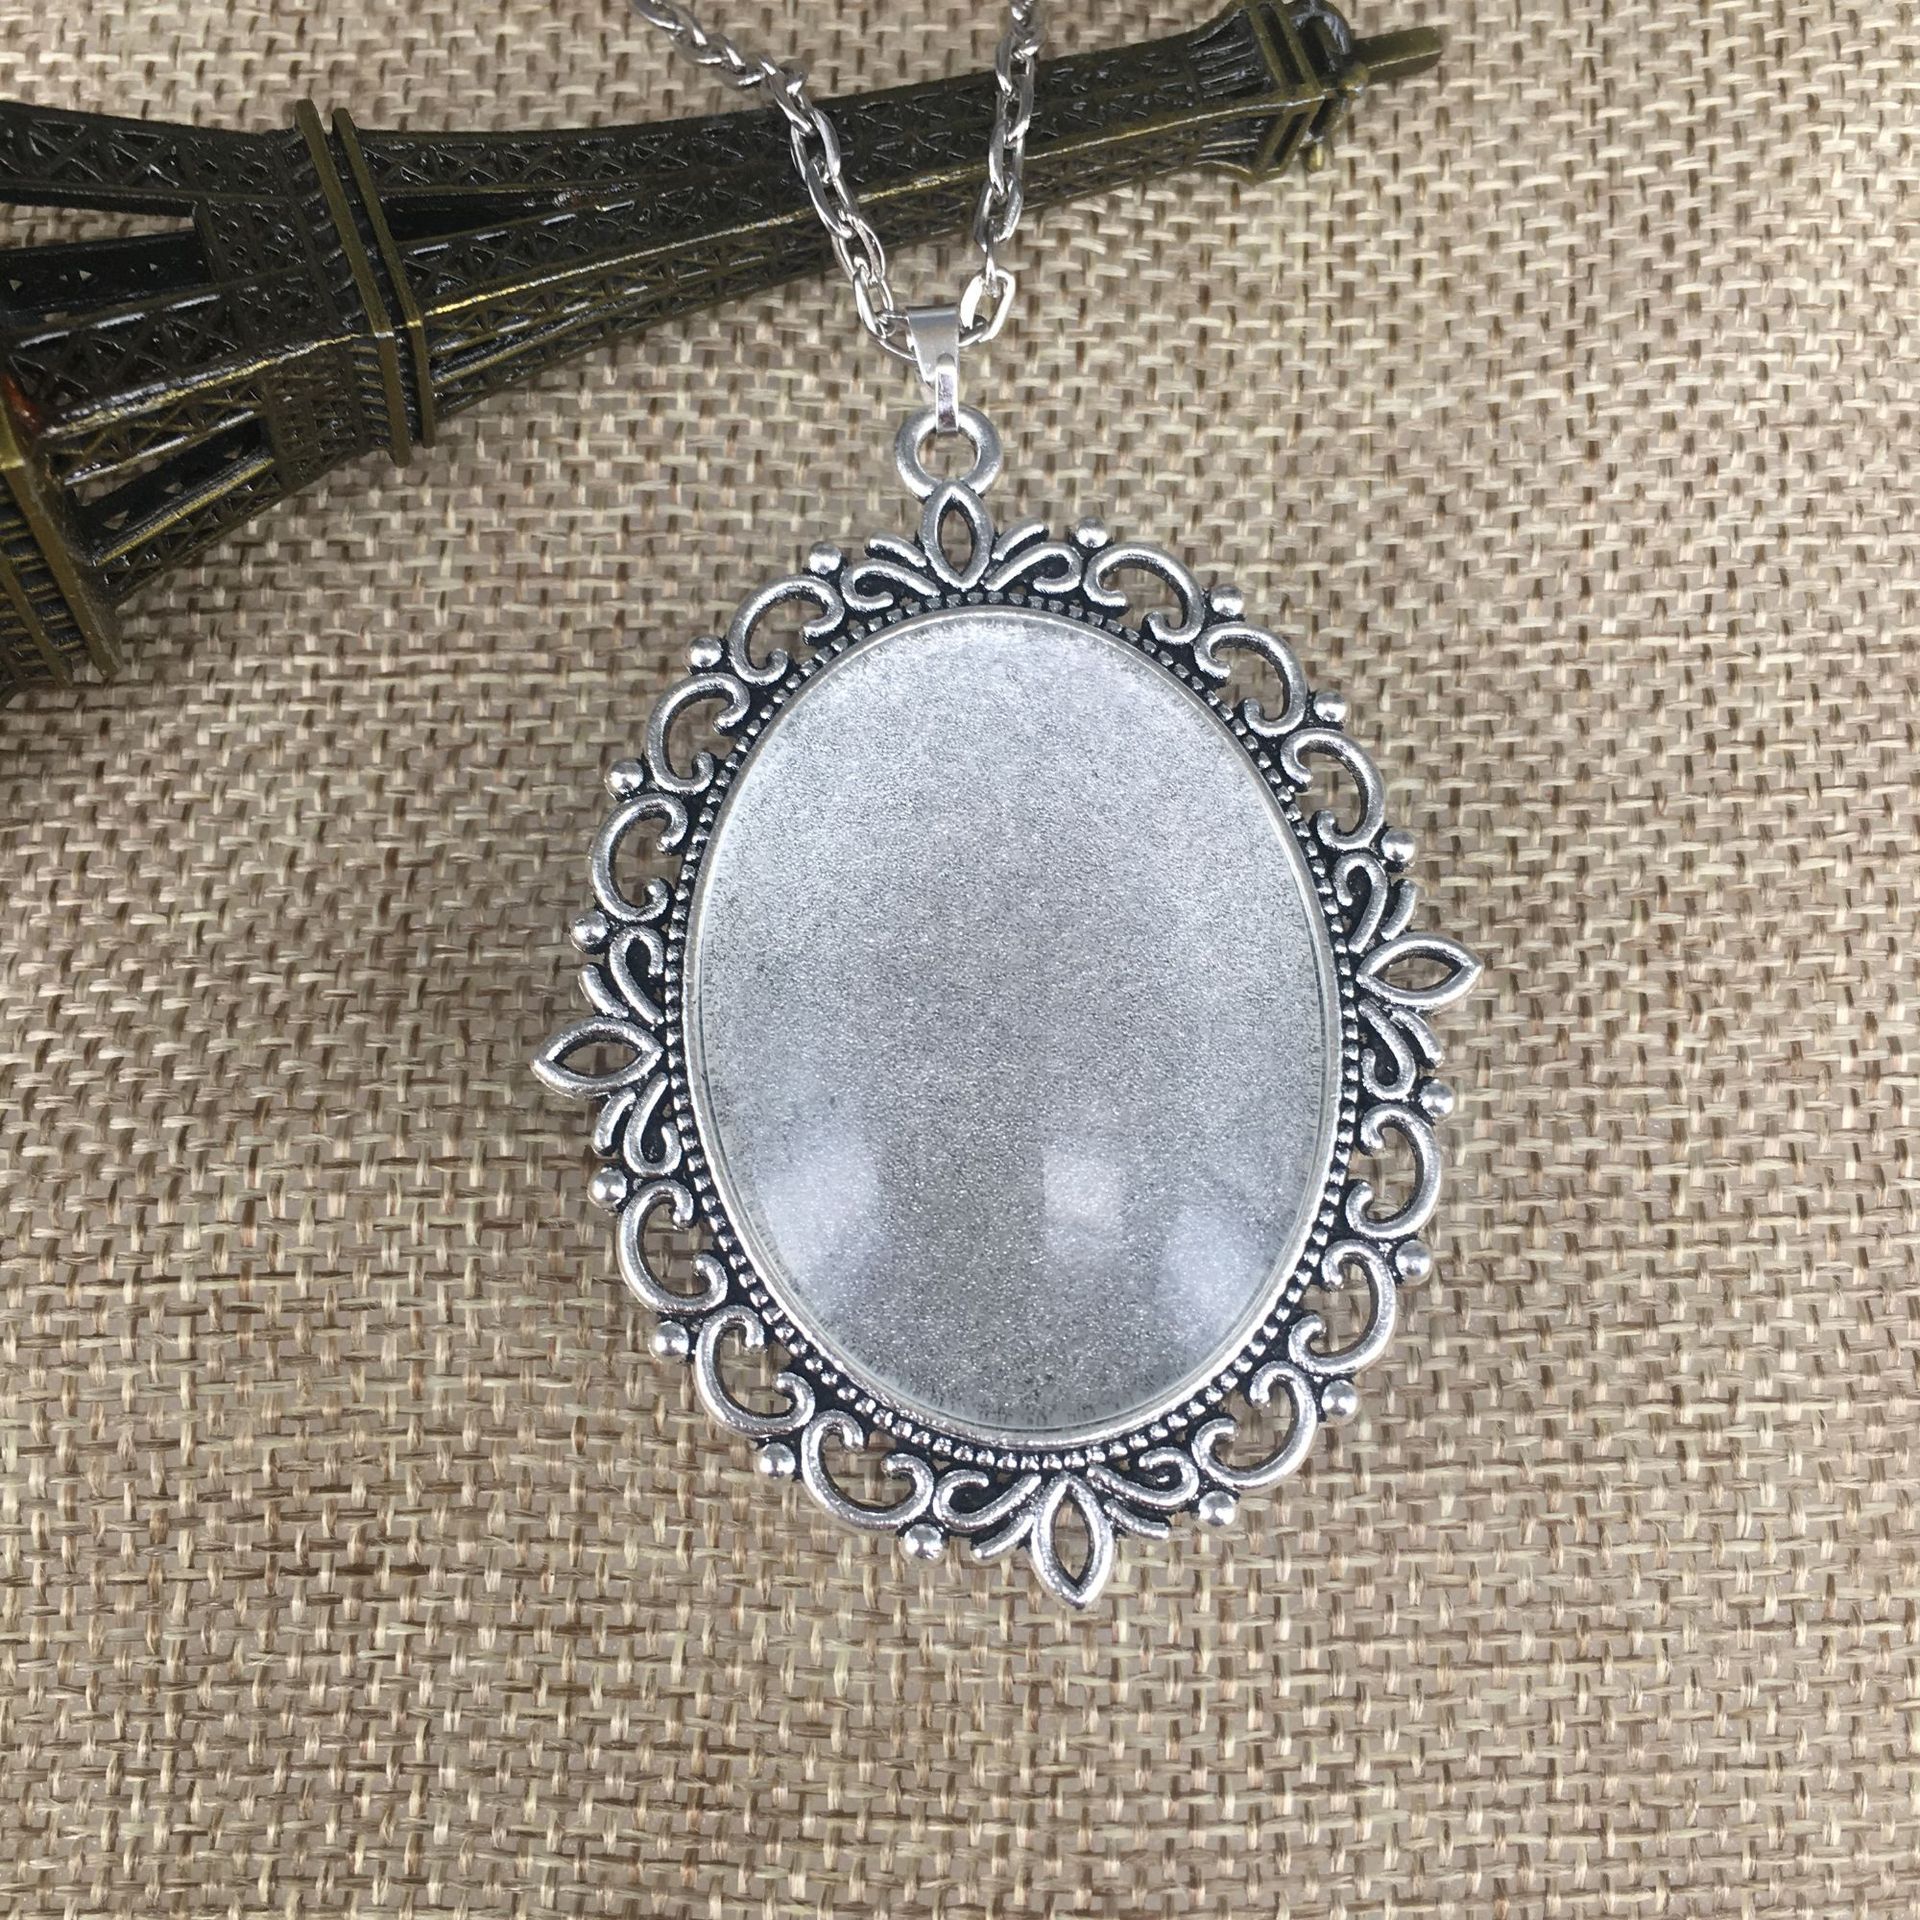 1 antique silver color plated